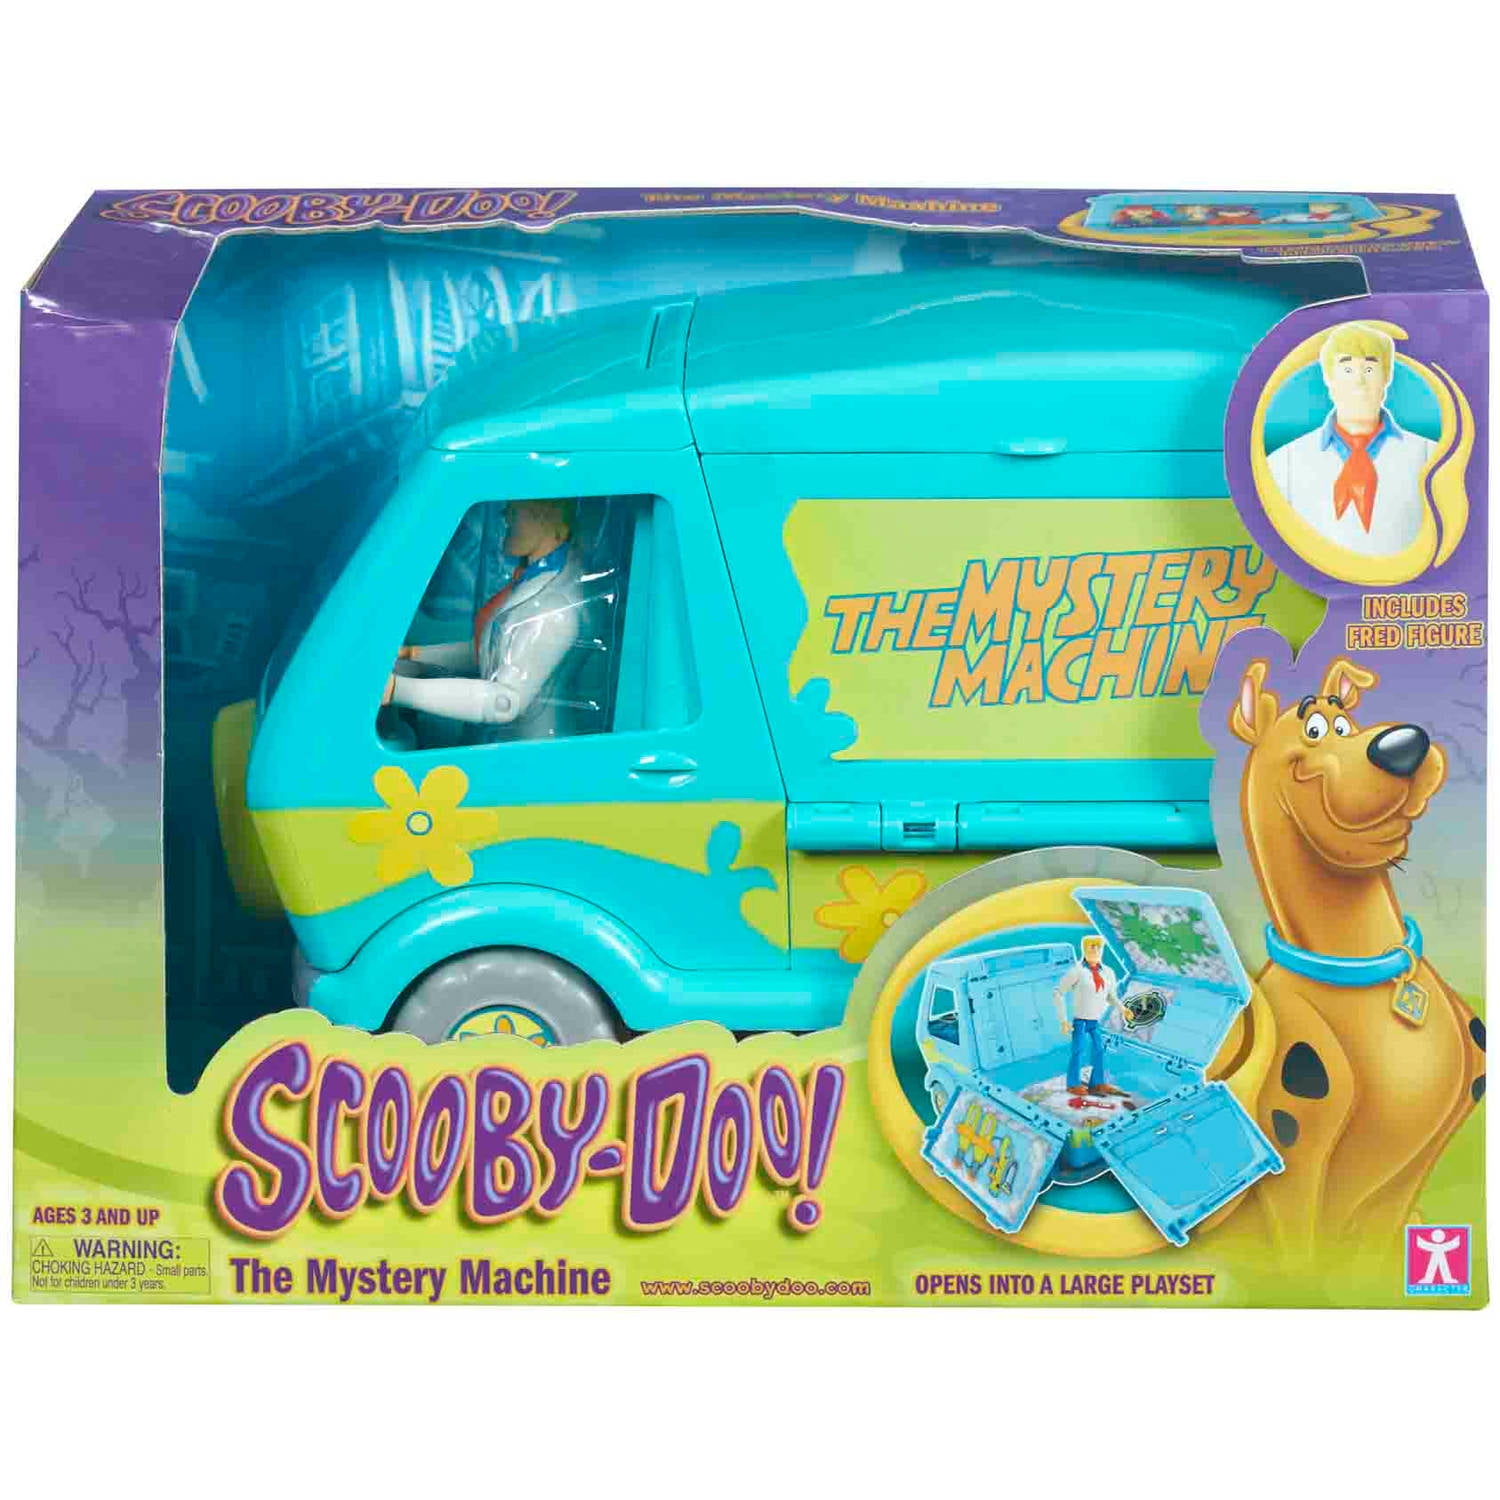 Scooby-Doo The Mystery Machine Playset 50 Years Walmart Exclusive Fred Figure 